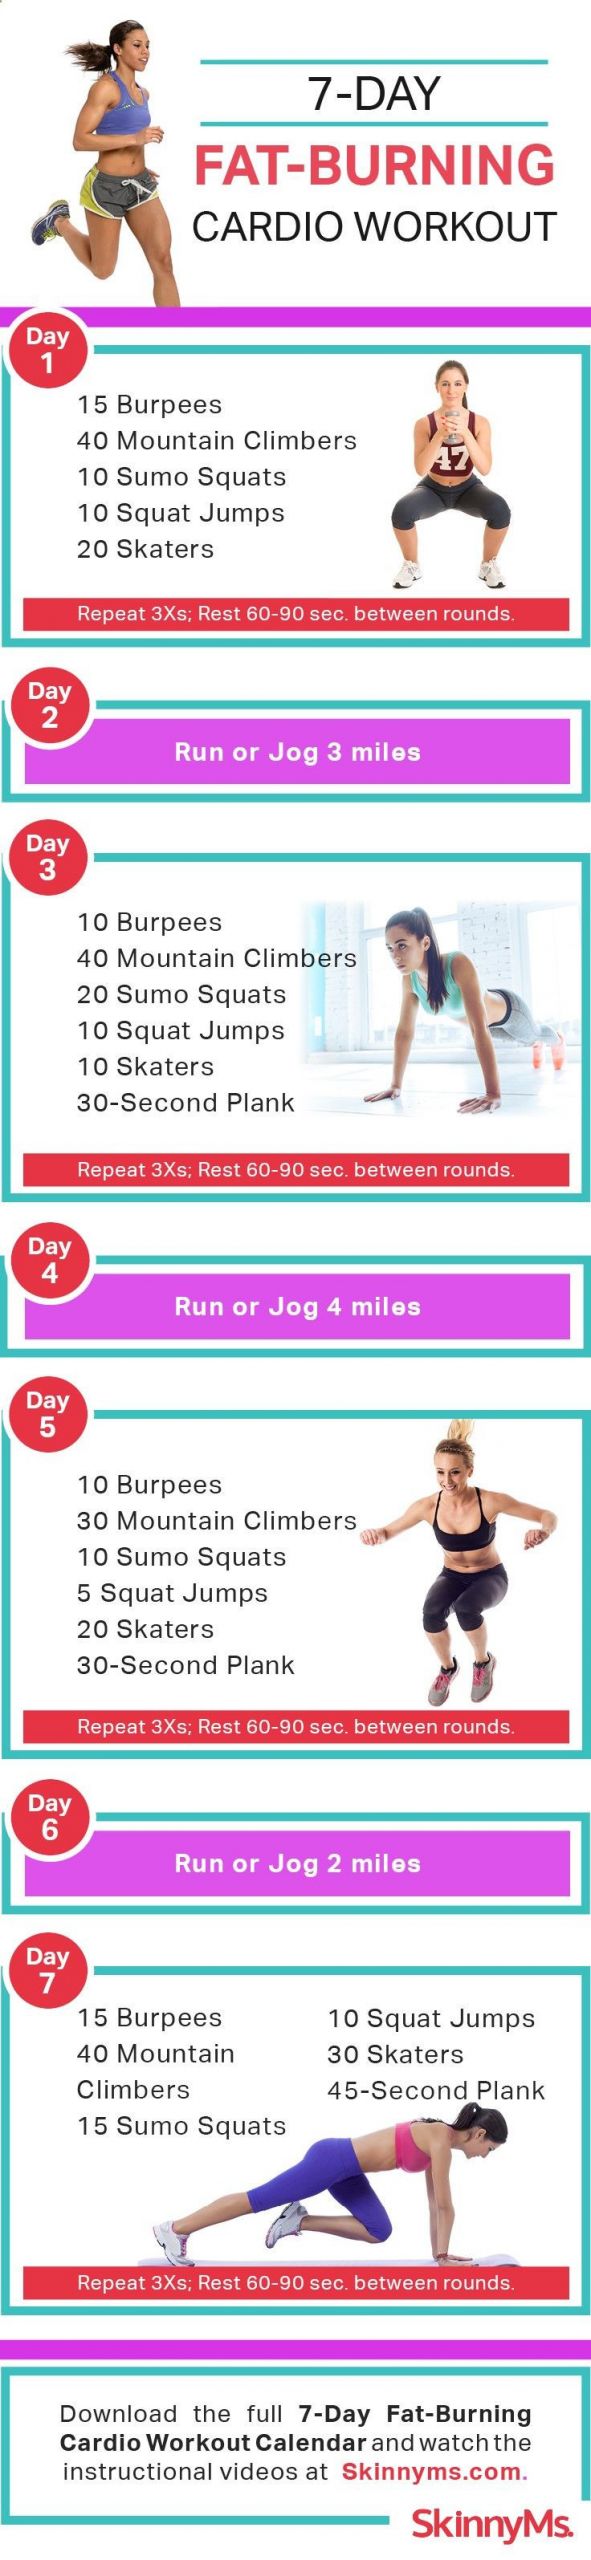 Weight Loss Exercises At Home Fat Burning Cardio Workouts
 7 Day Fat Burning Cardio Workout Start today skinnyms